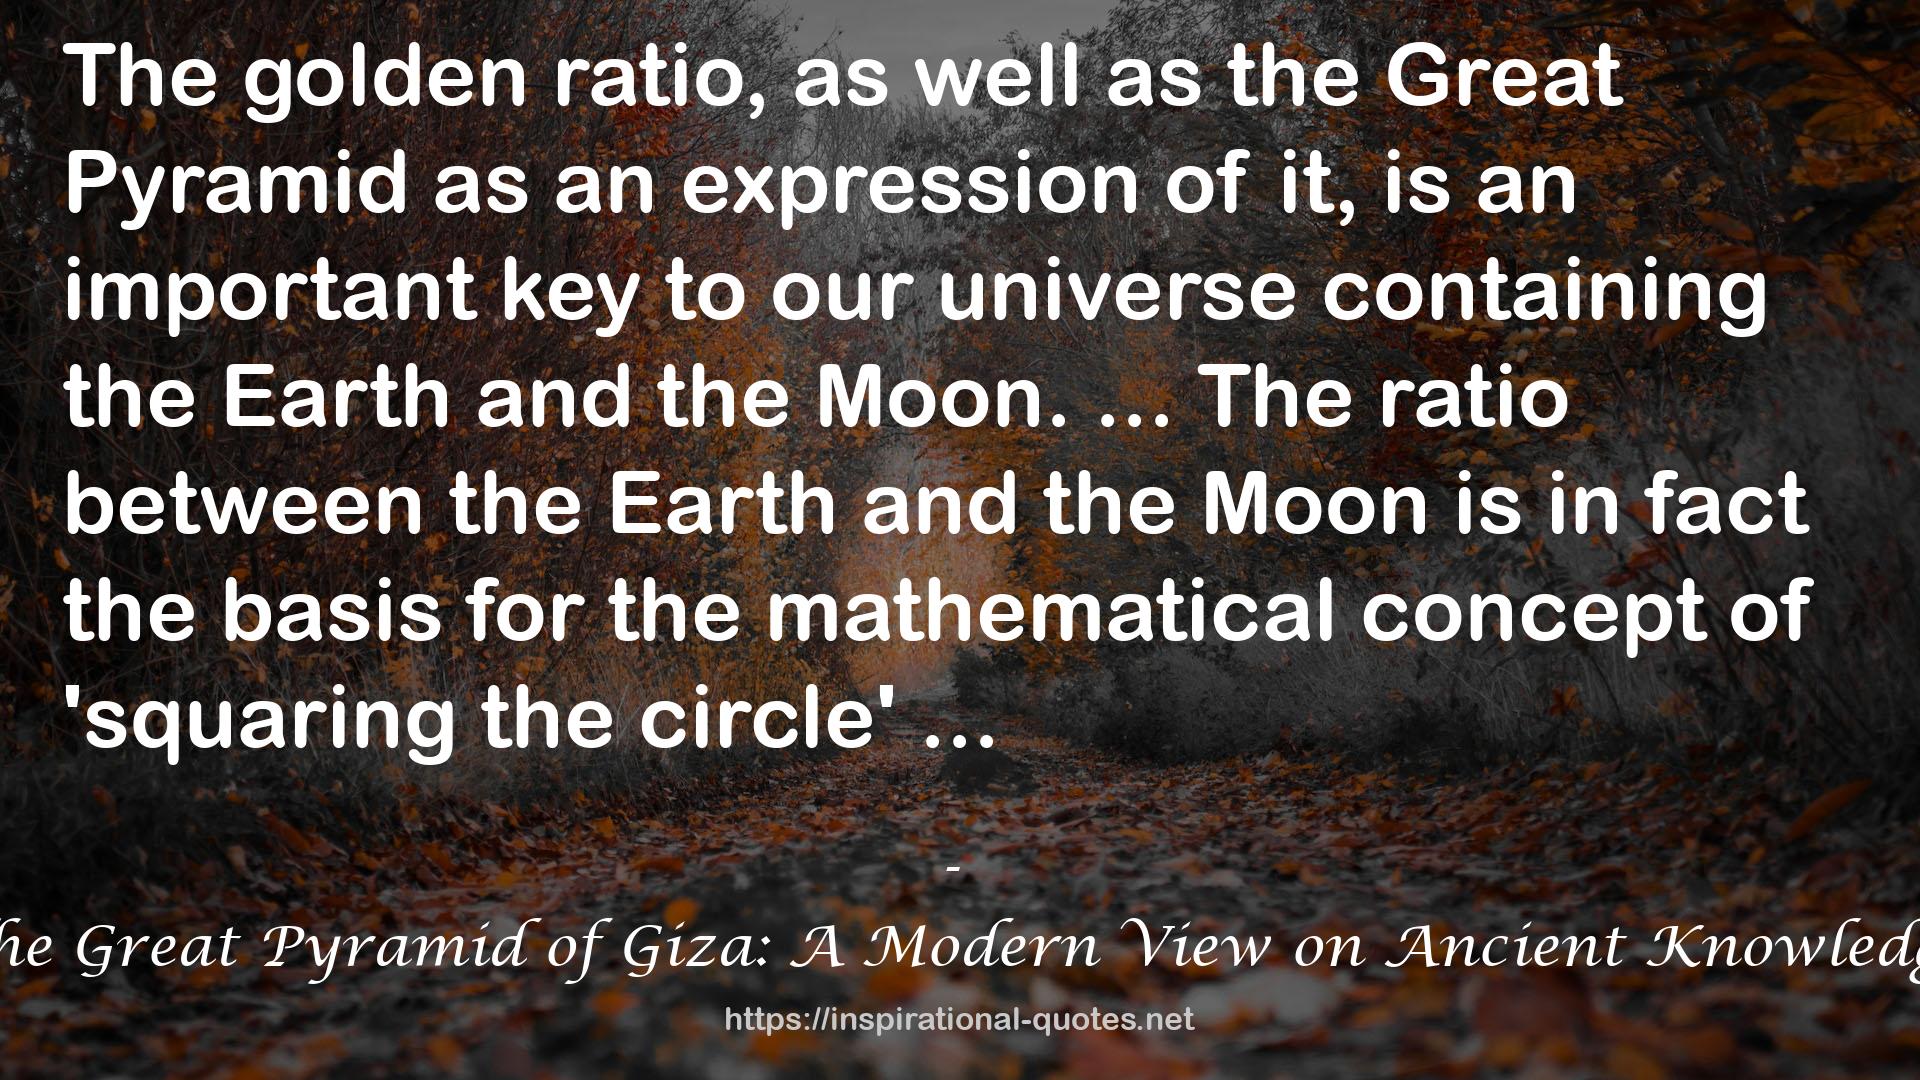 The Great Pyramid of Giza: A Modern View on Ancient Knowledge QUOTES